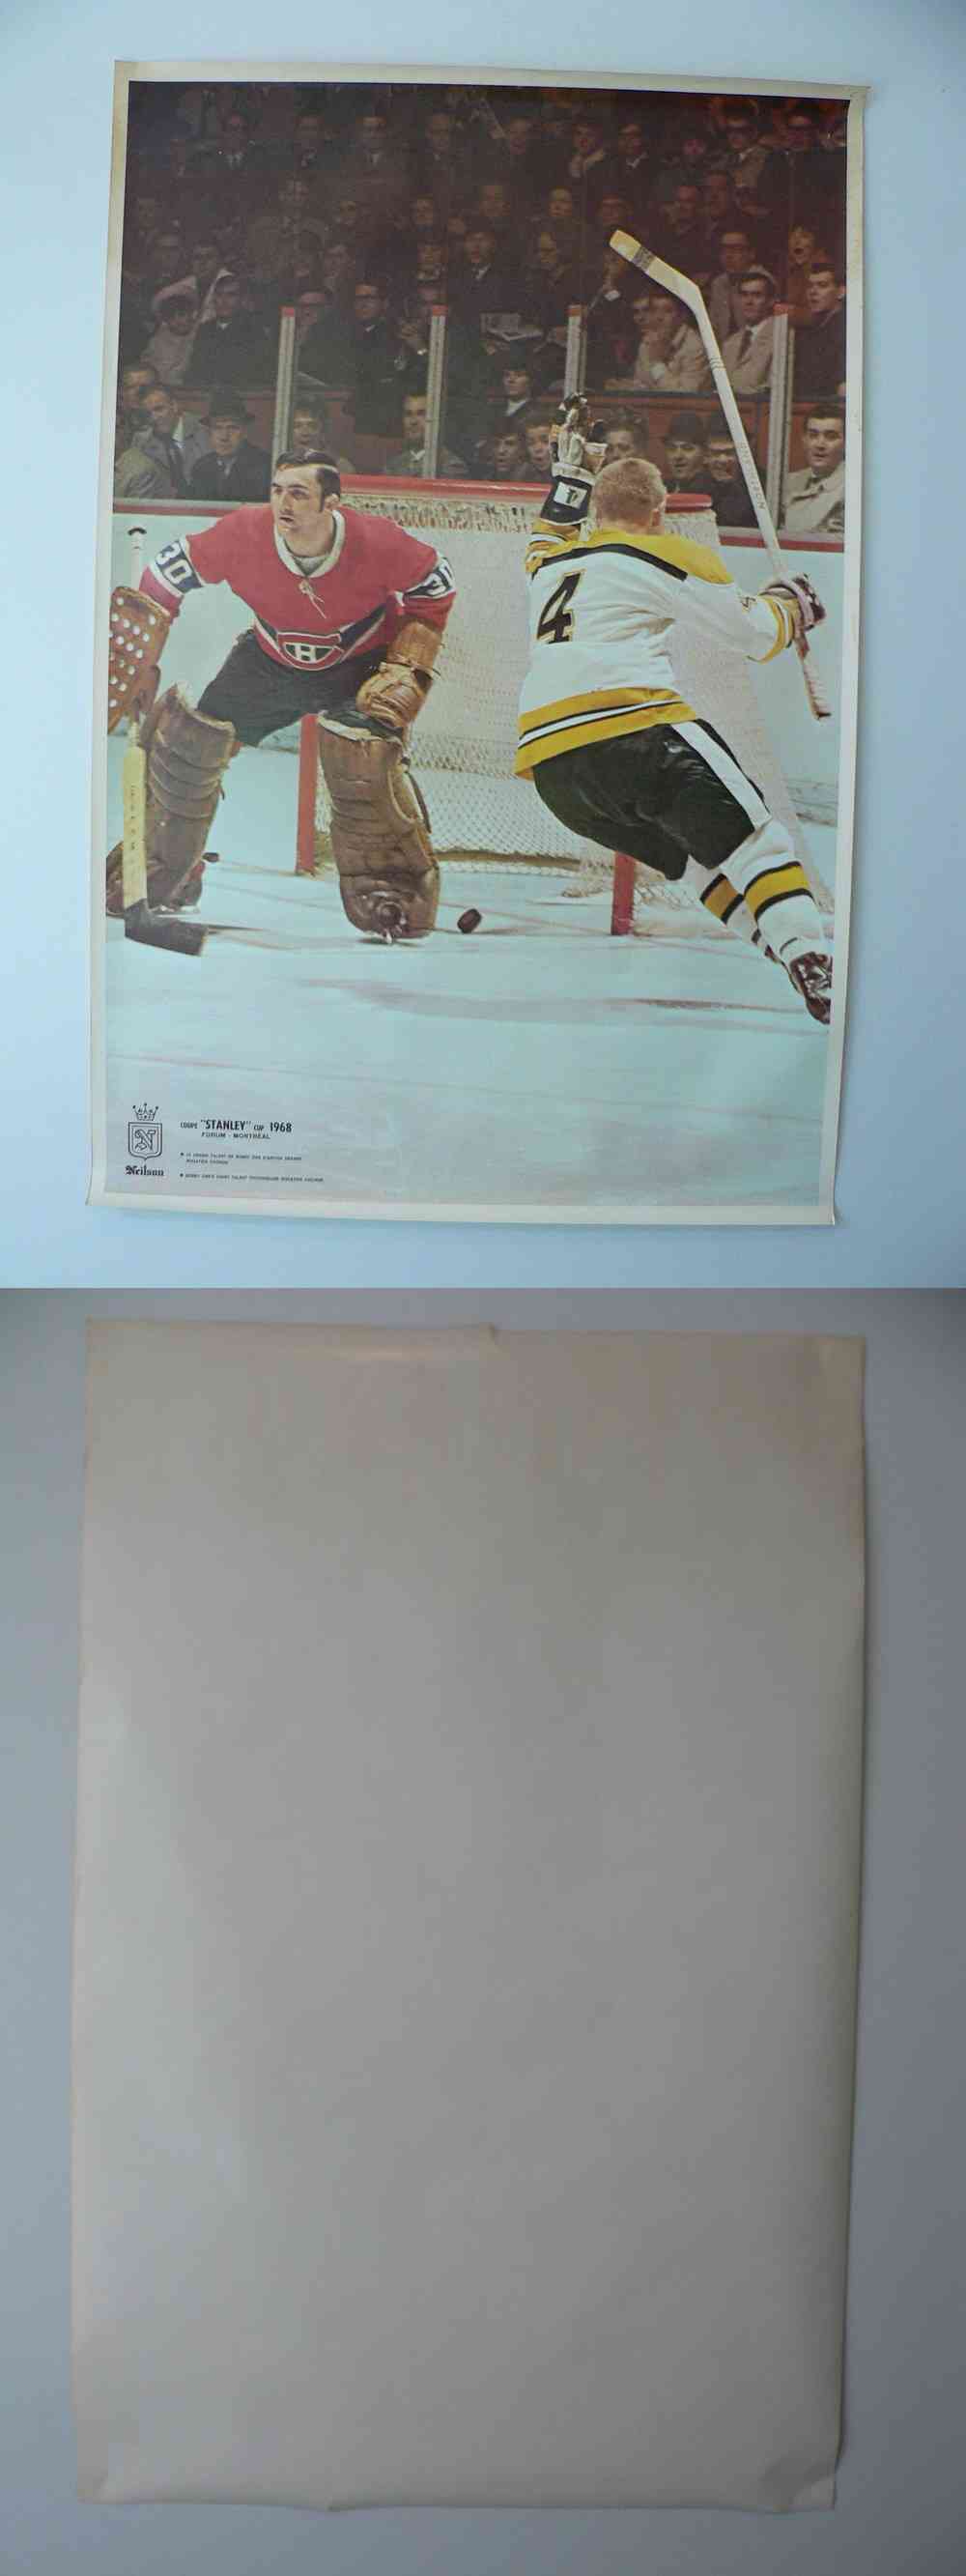 1968 NEILSON'S STANLEY CUP POSTER B. ORR/ R. VACHON photo